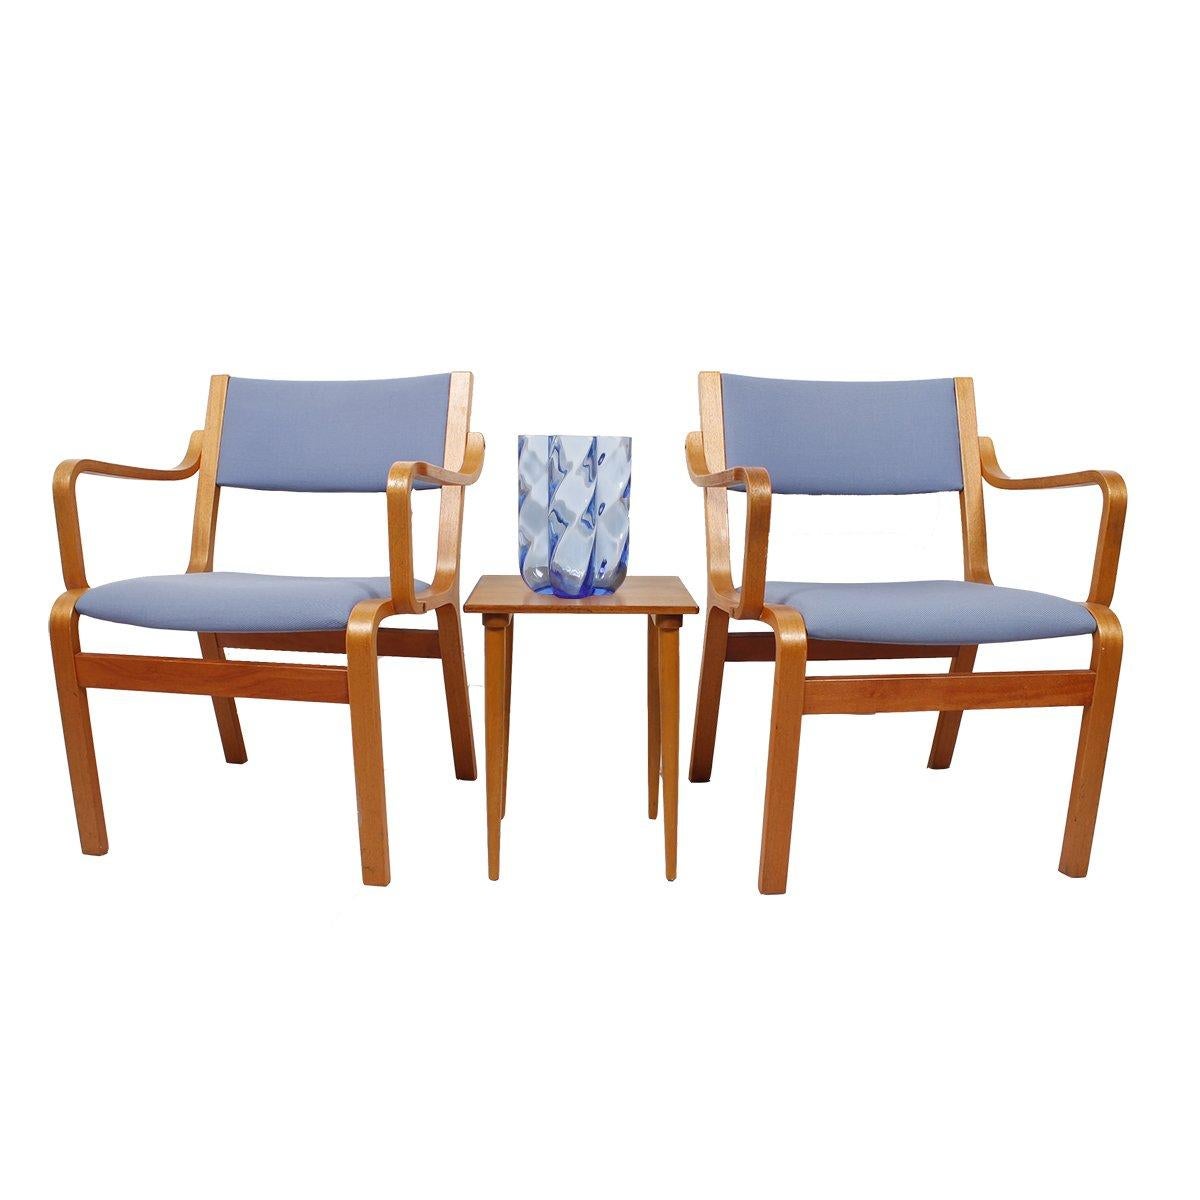 20th Century Pair of Bentwood Arm Chairs with Blue Upholstery from Danish Embassy